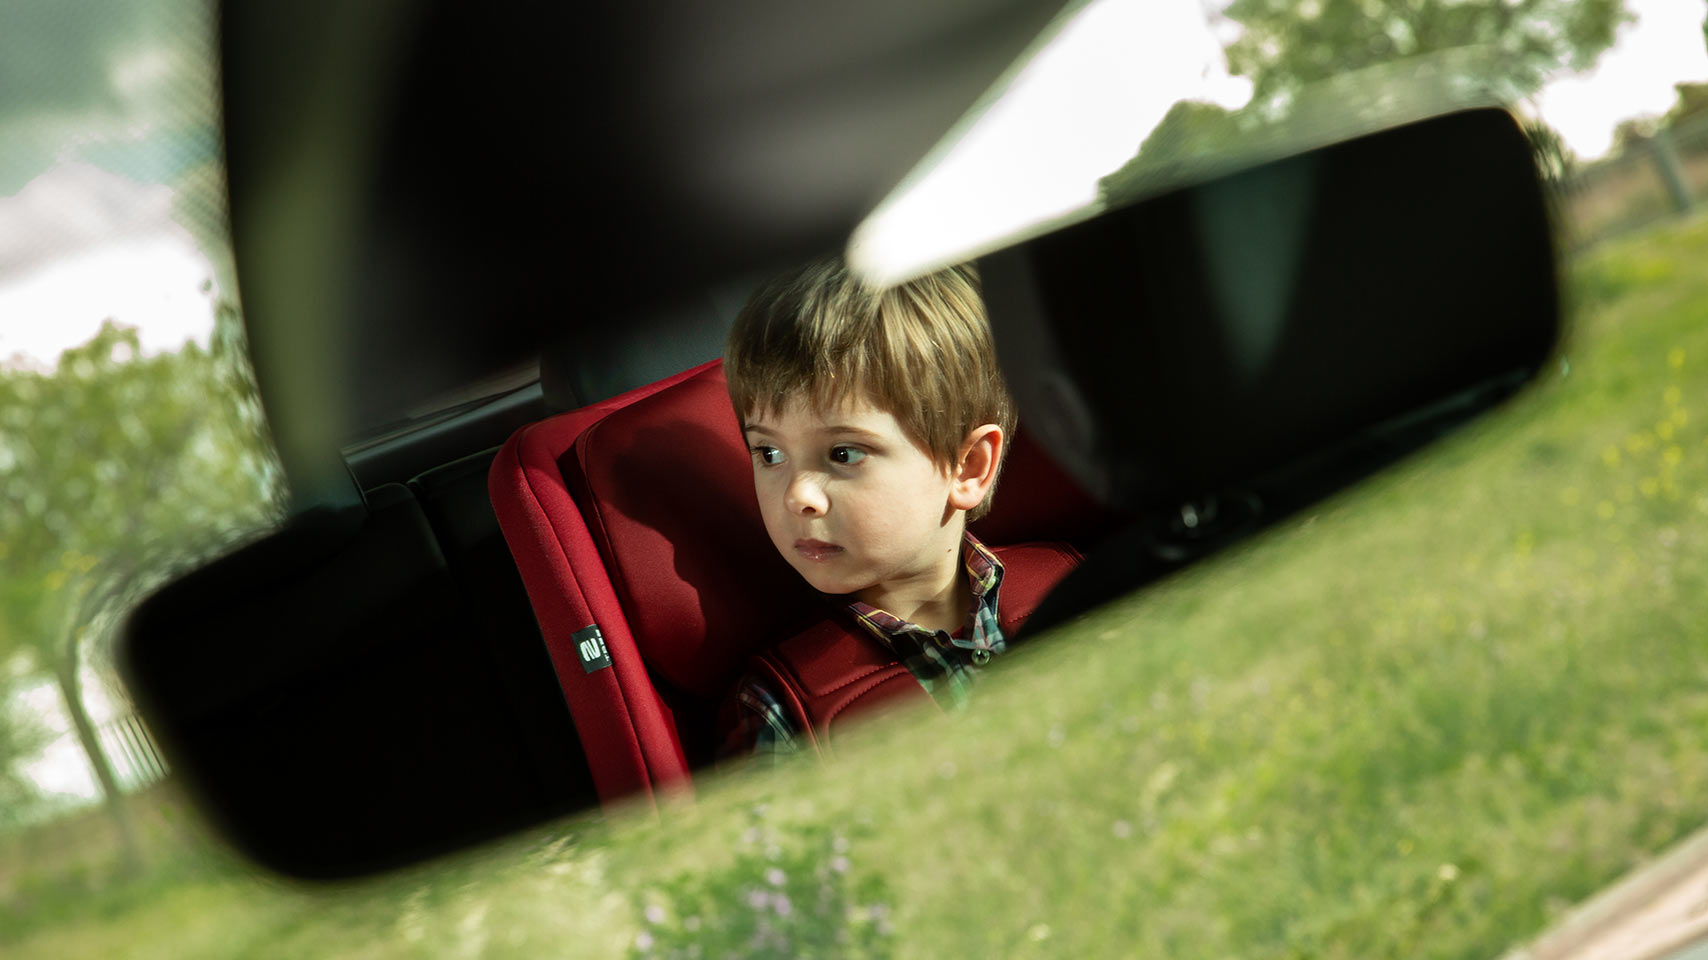 Many parents spend four full days a year getting kids into the car.